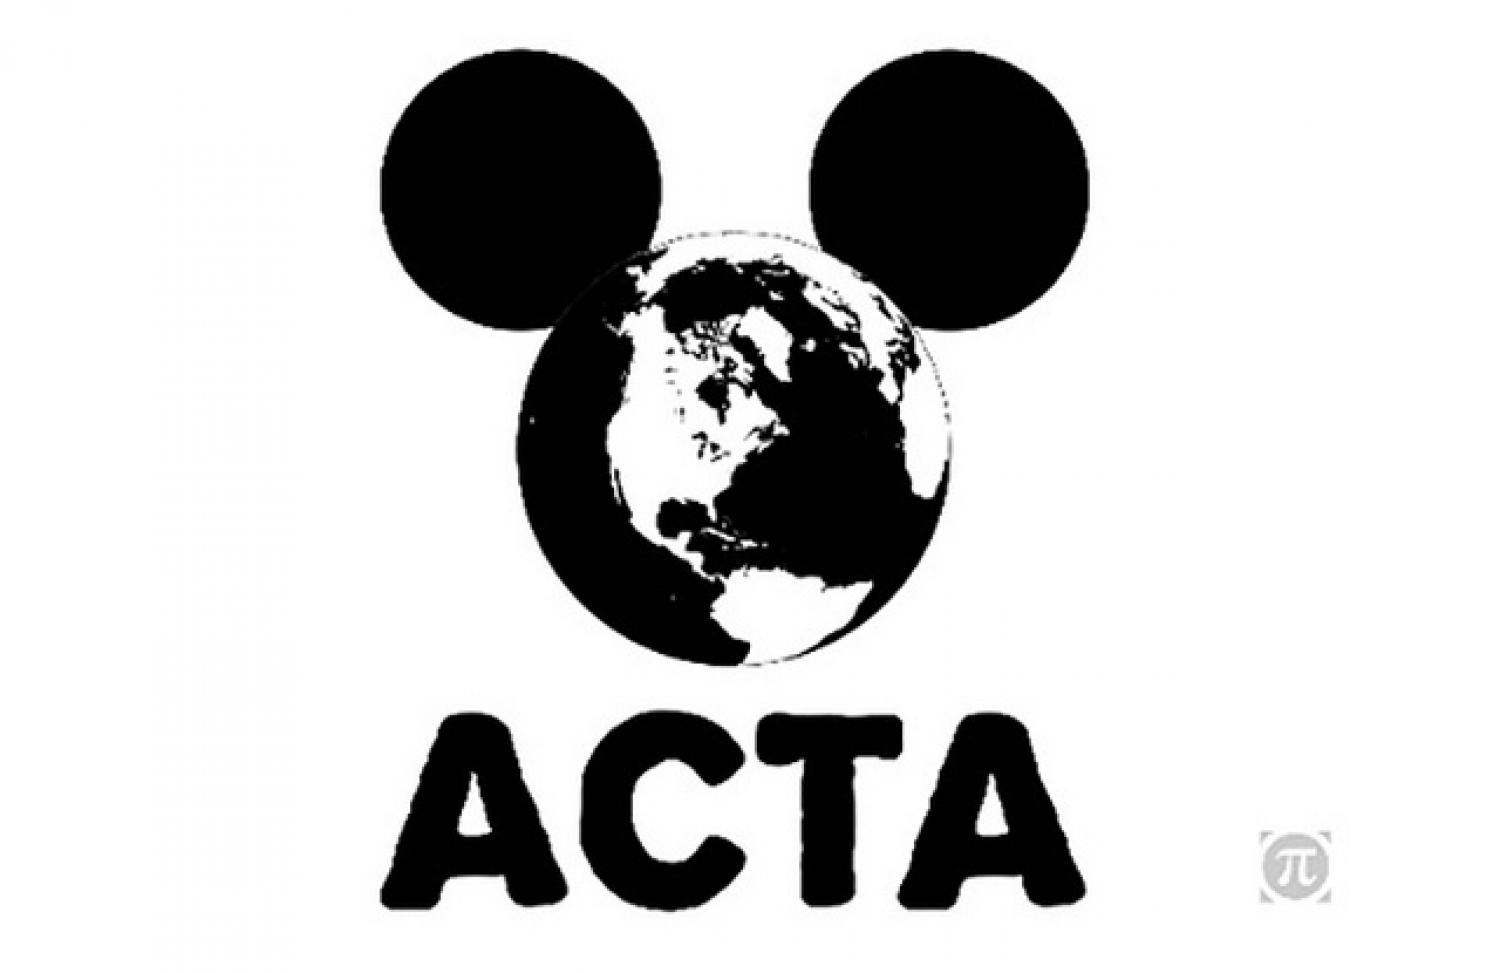 ACTA protest day, February 11, 2012